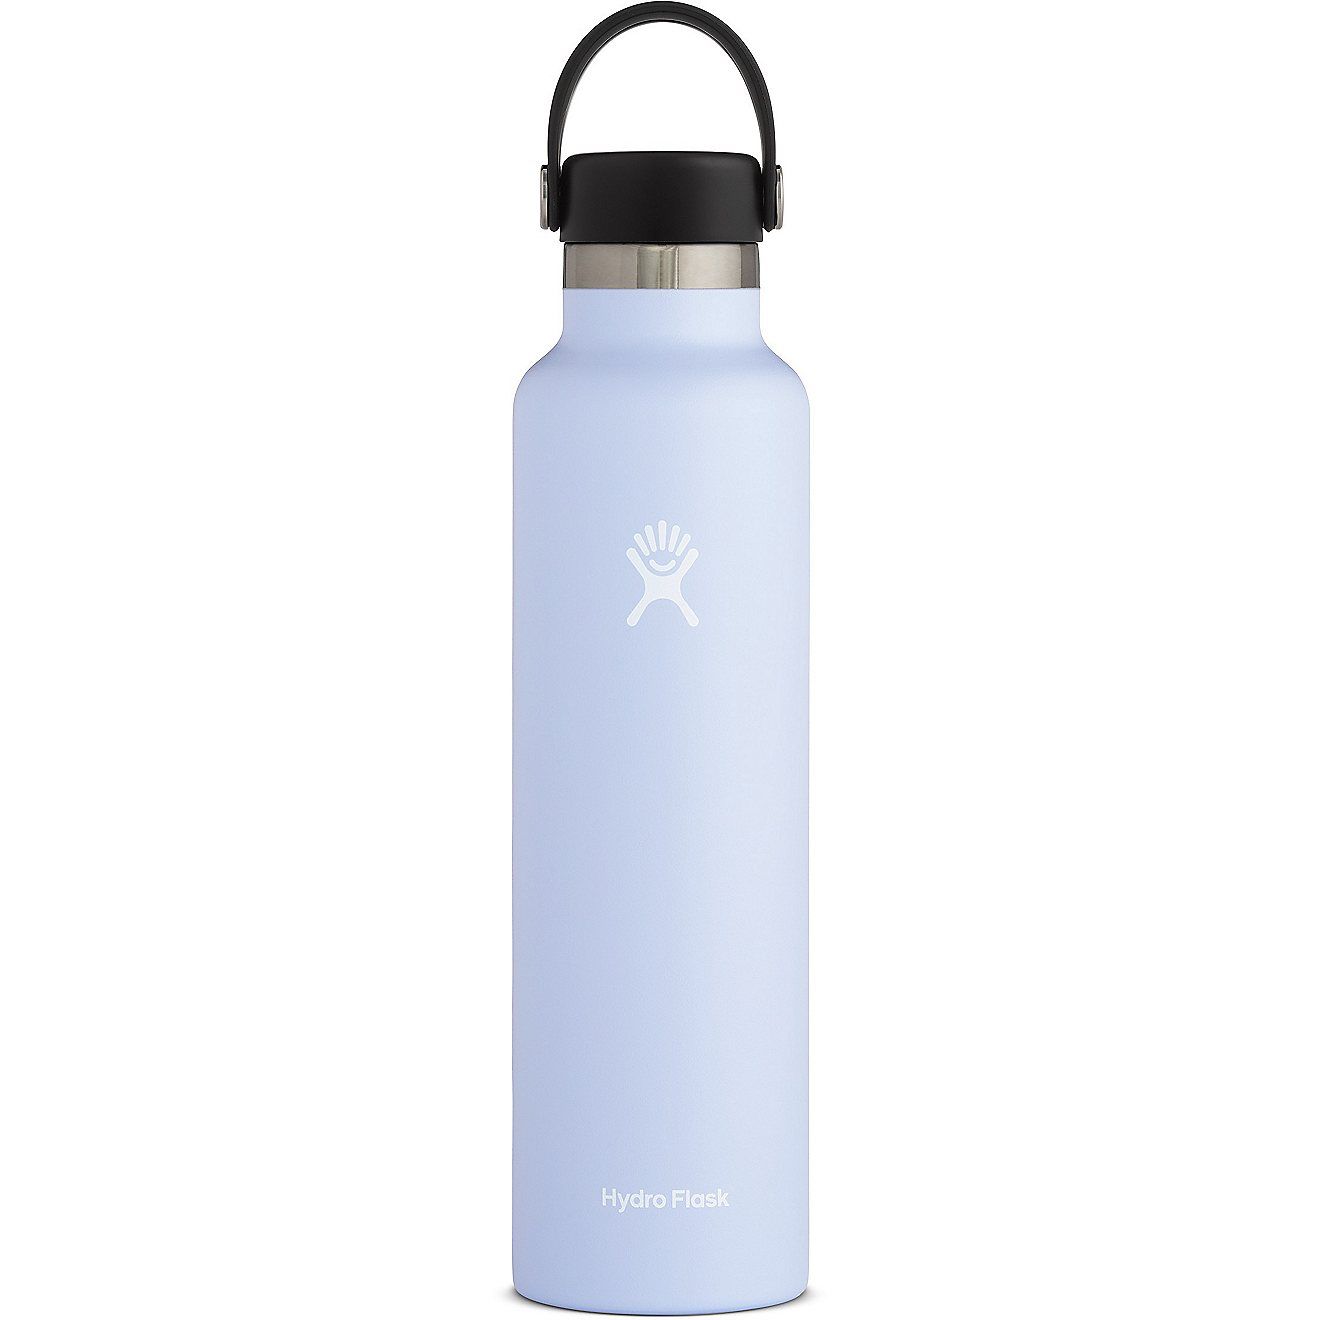 Hydro Flask 24 oz. Standard-Mouth Water Bottle | Academy | Academy Sports + Outdoors